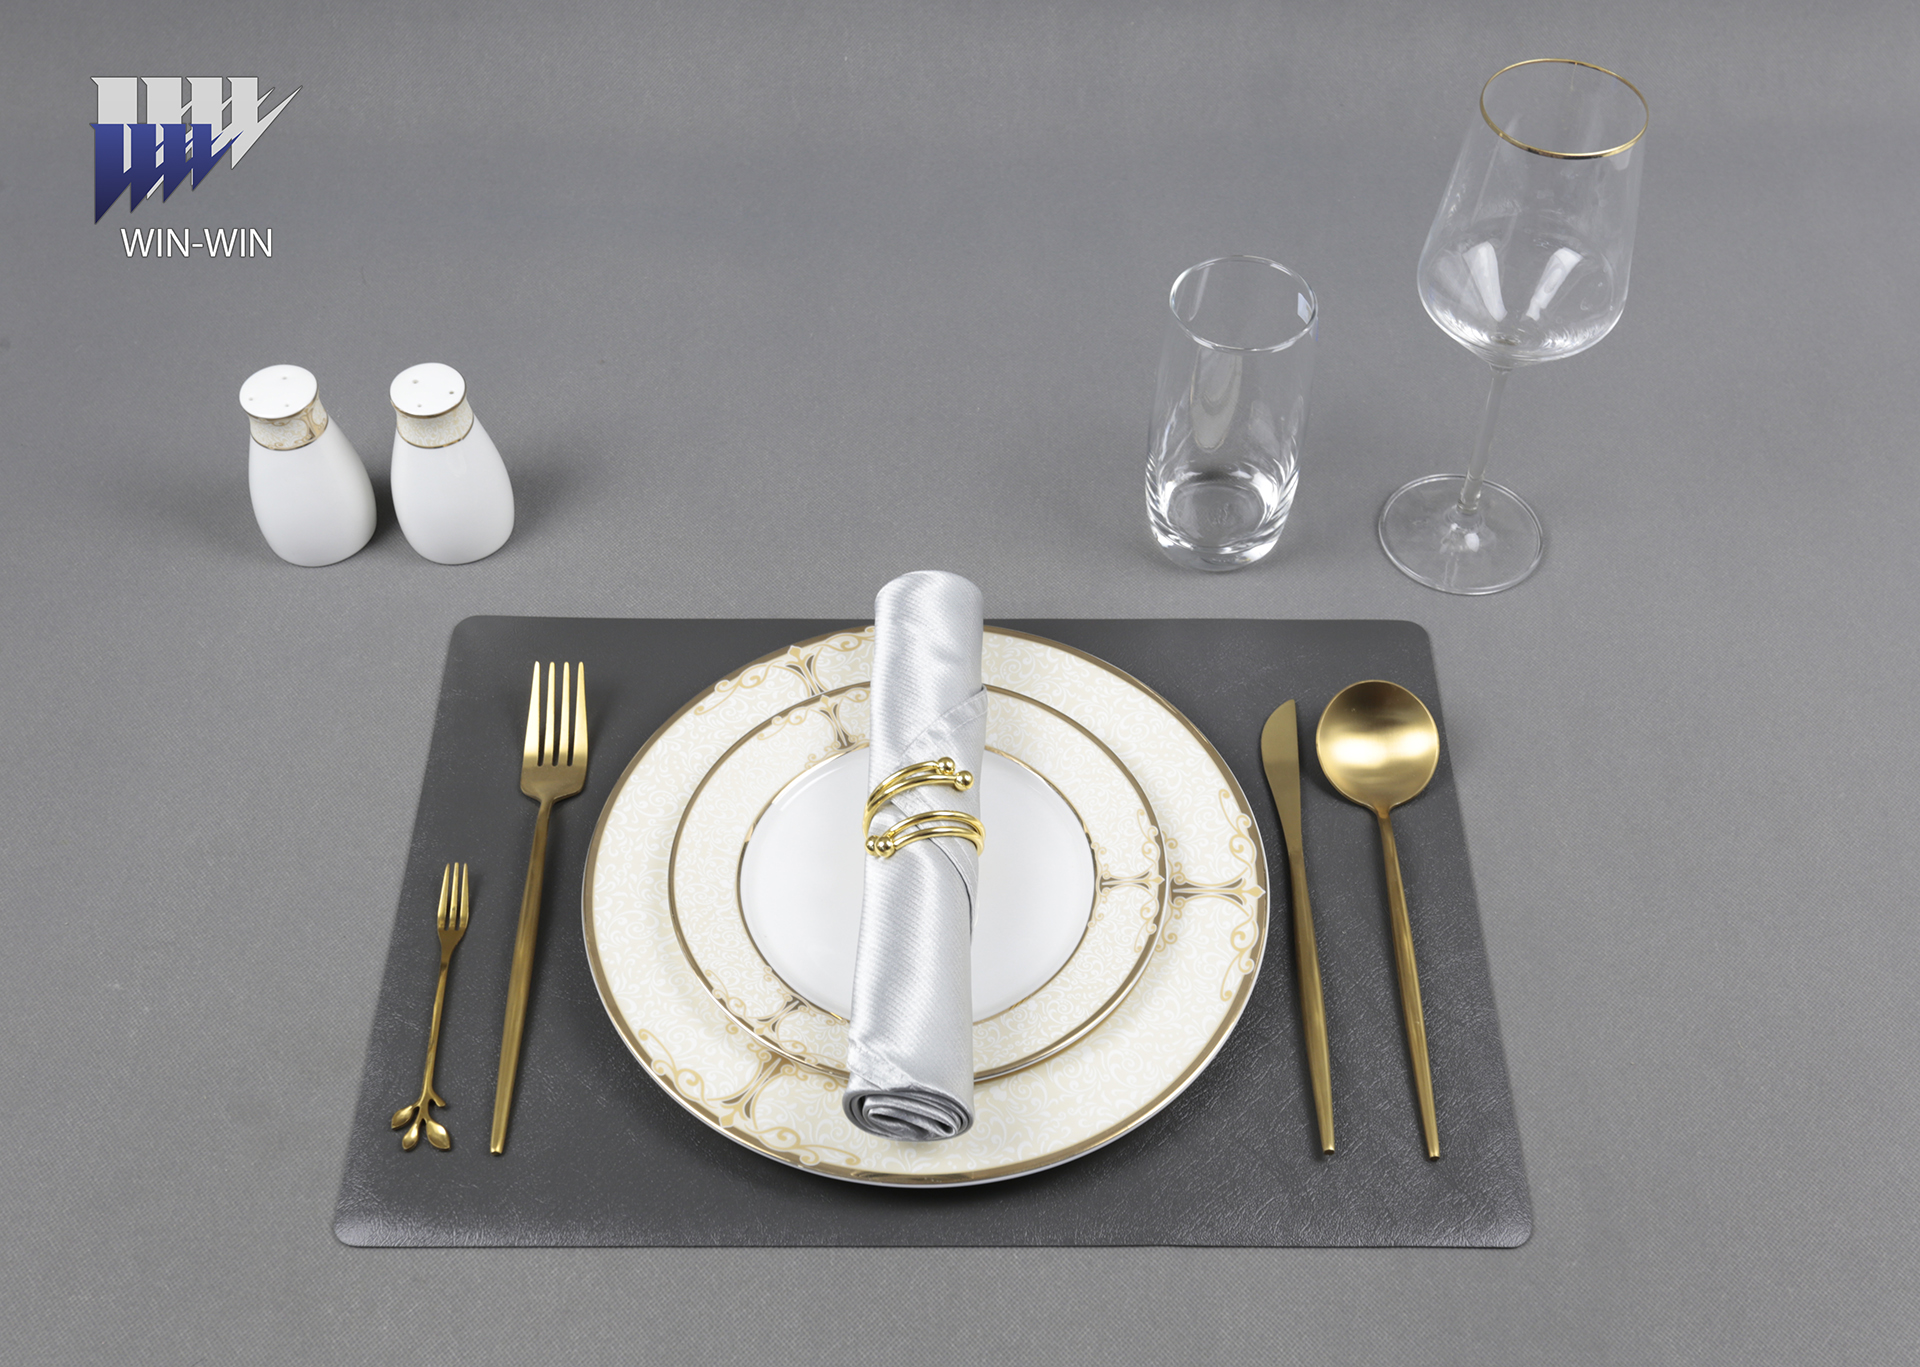 Tangshan Win-Win Ceramics tells you how to arrange the dining table in a formal restaurant